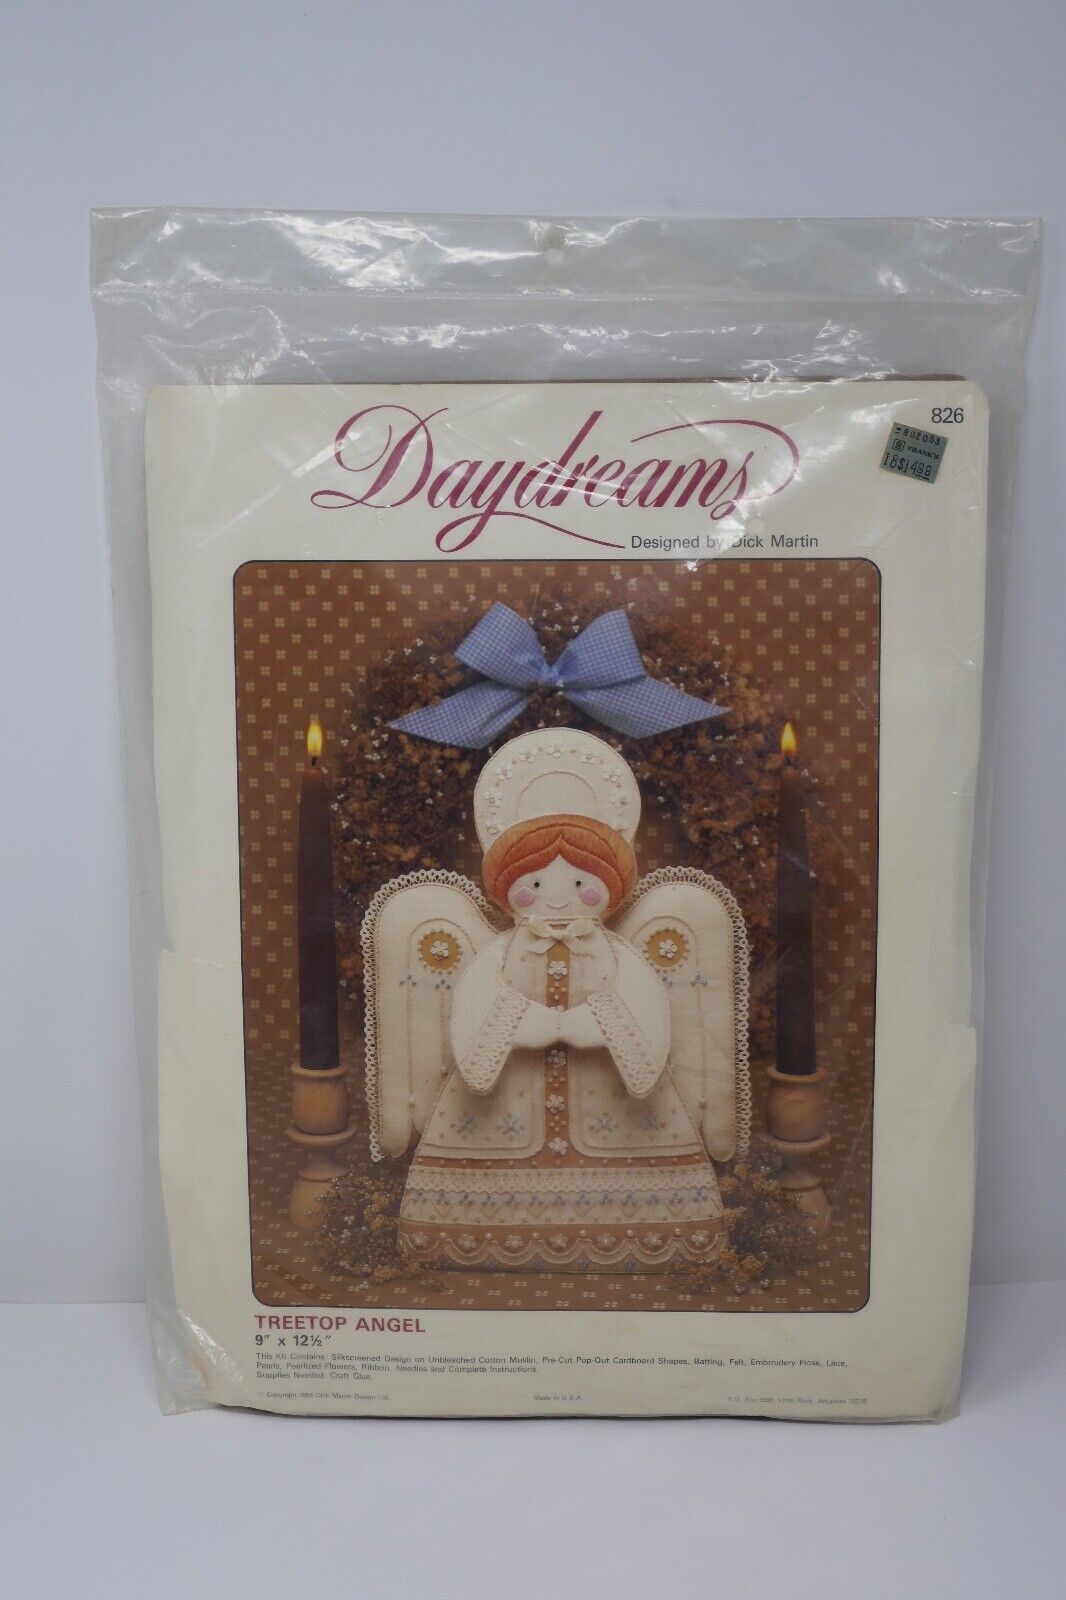 Daydreams 1984 Dick Martin Design Embroidery Kit Treetop Angel NOS - $22.99